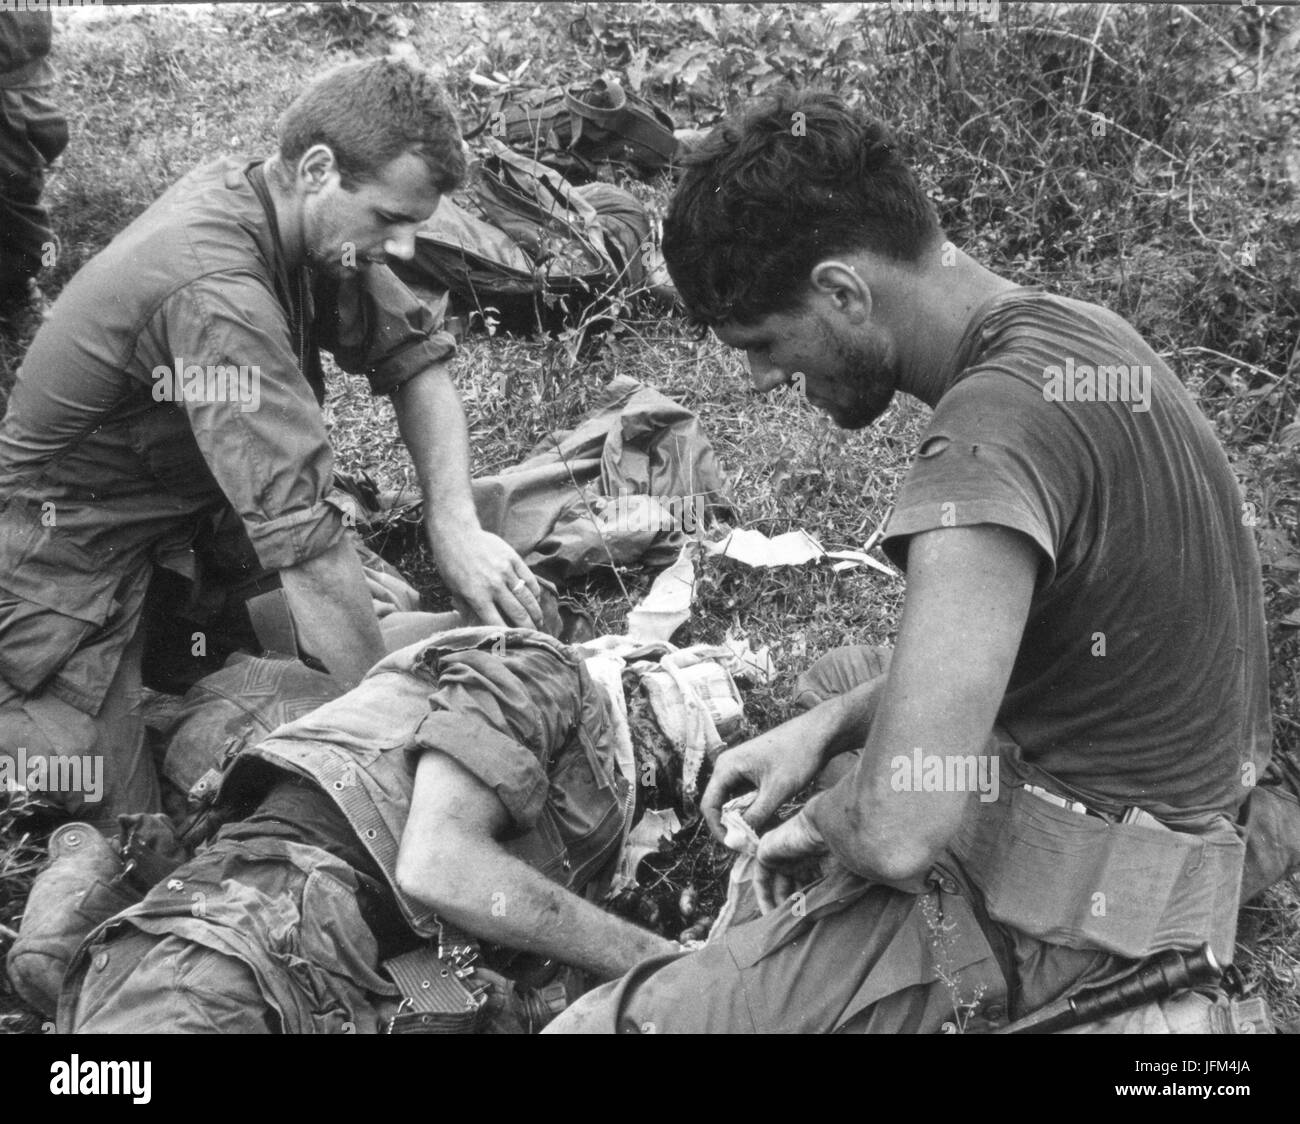 Members of Charlie Company administer emergency first aid to a wounded Marine following the detonation of a booby trap. 2/68 Stock Photo